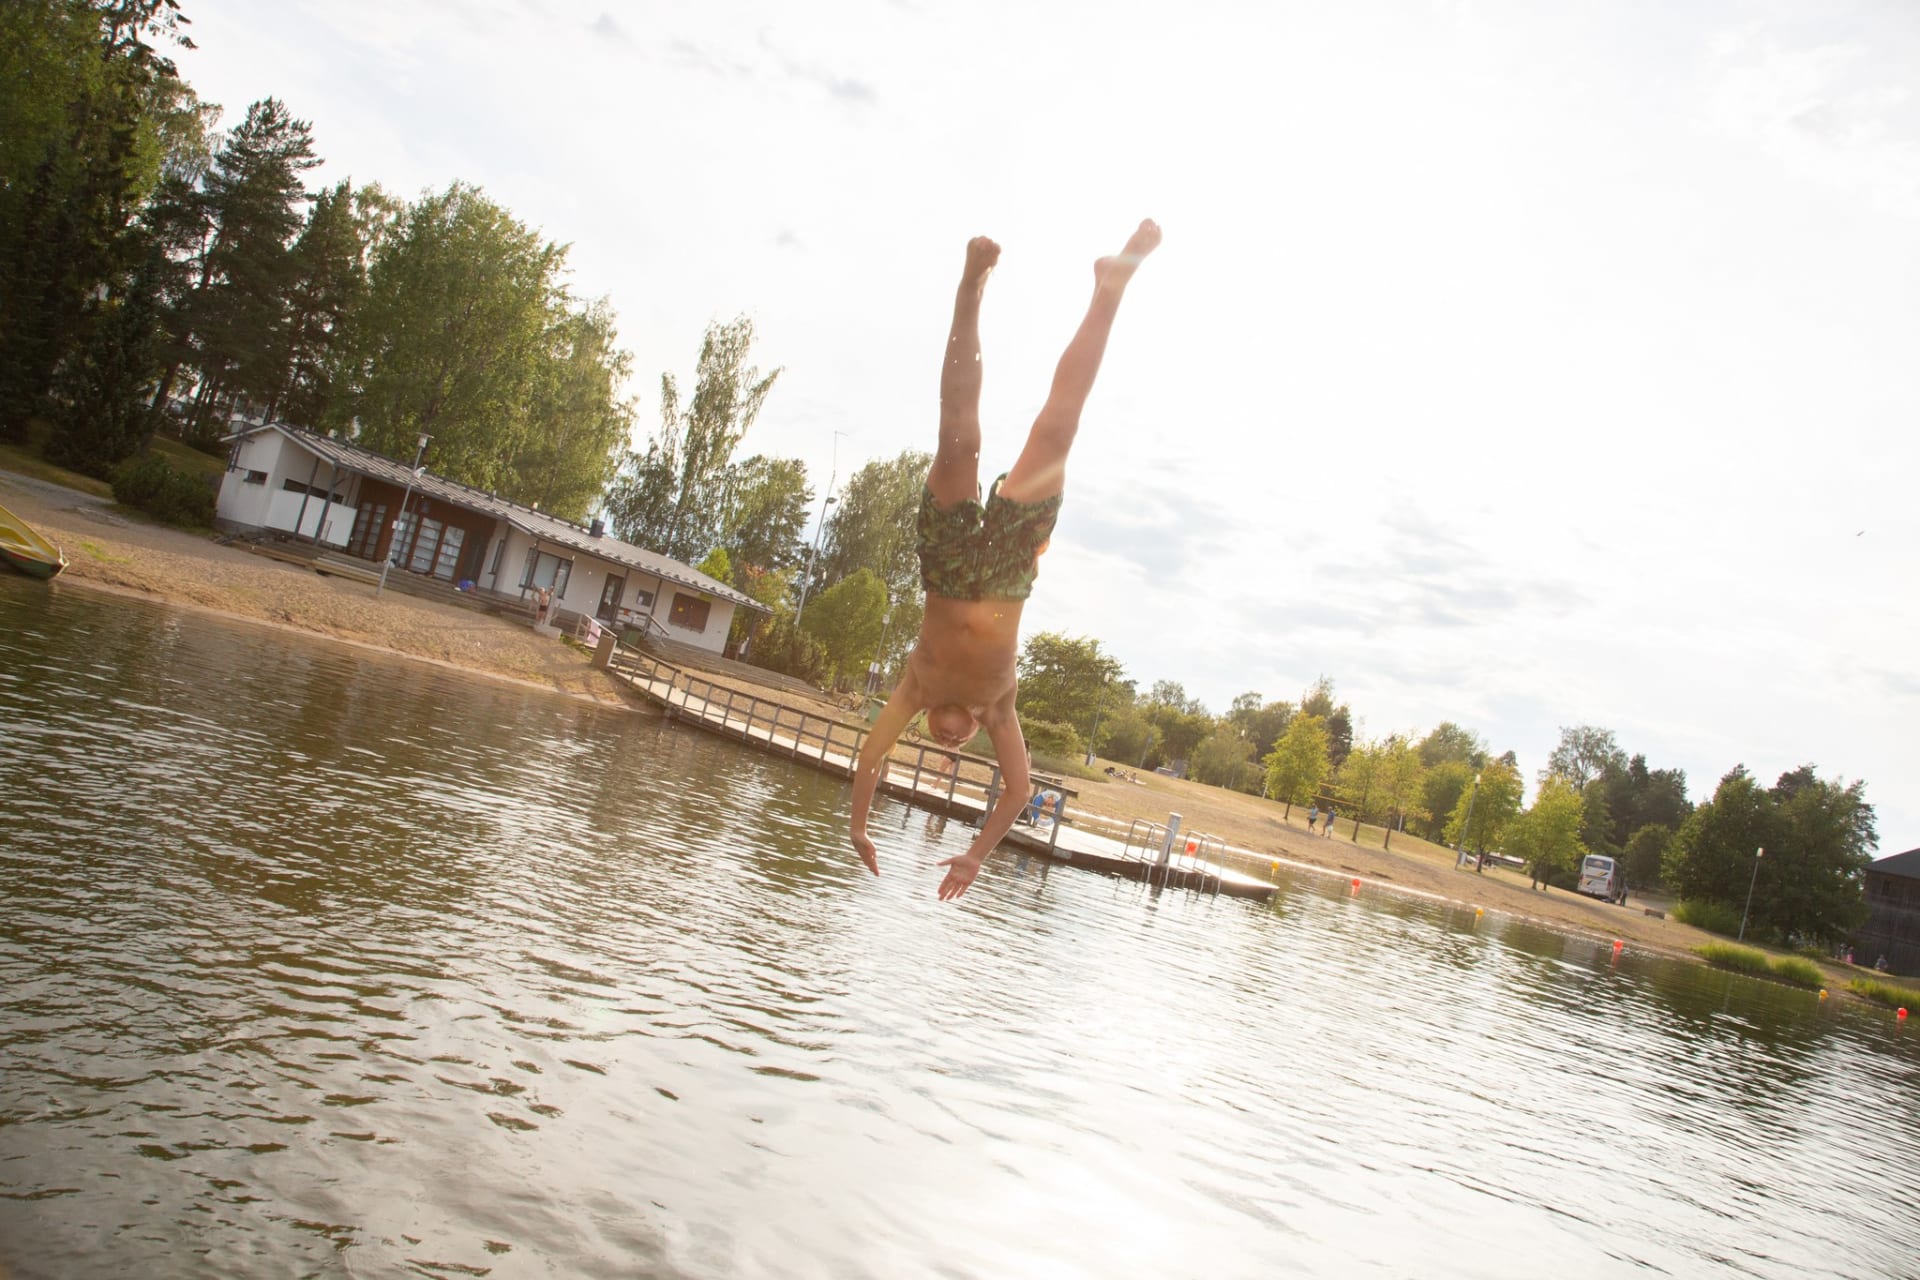 A boy jumps from the pier to the water at Apianlahti beach in Valkeakoski.